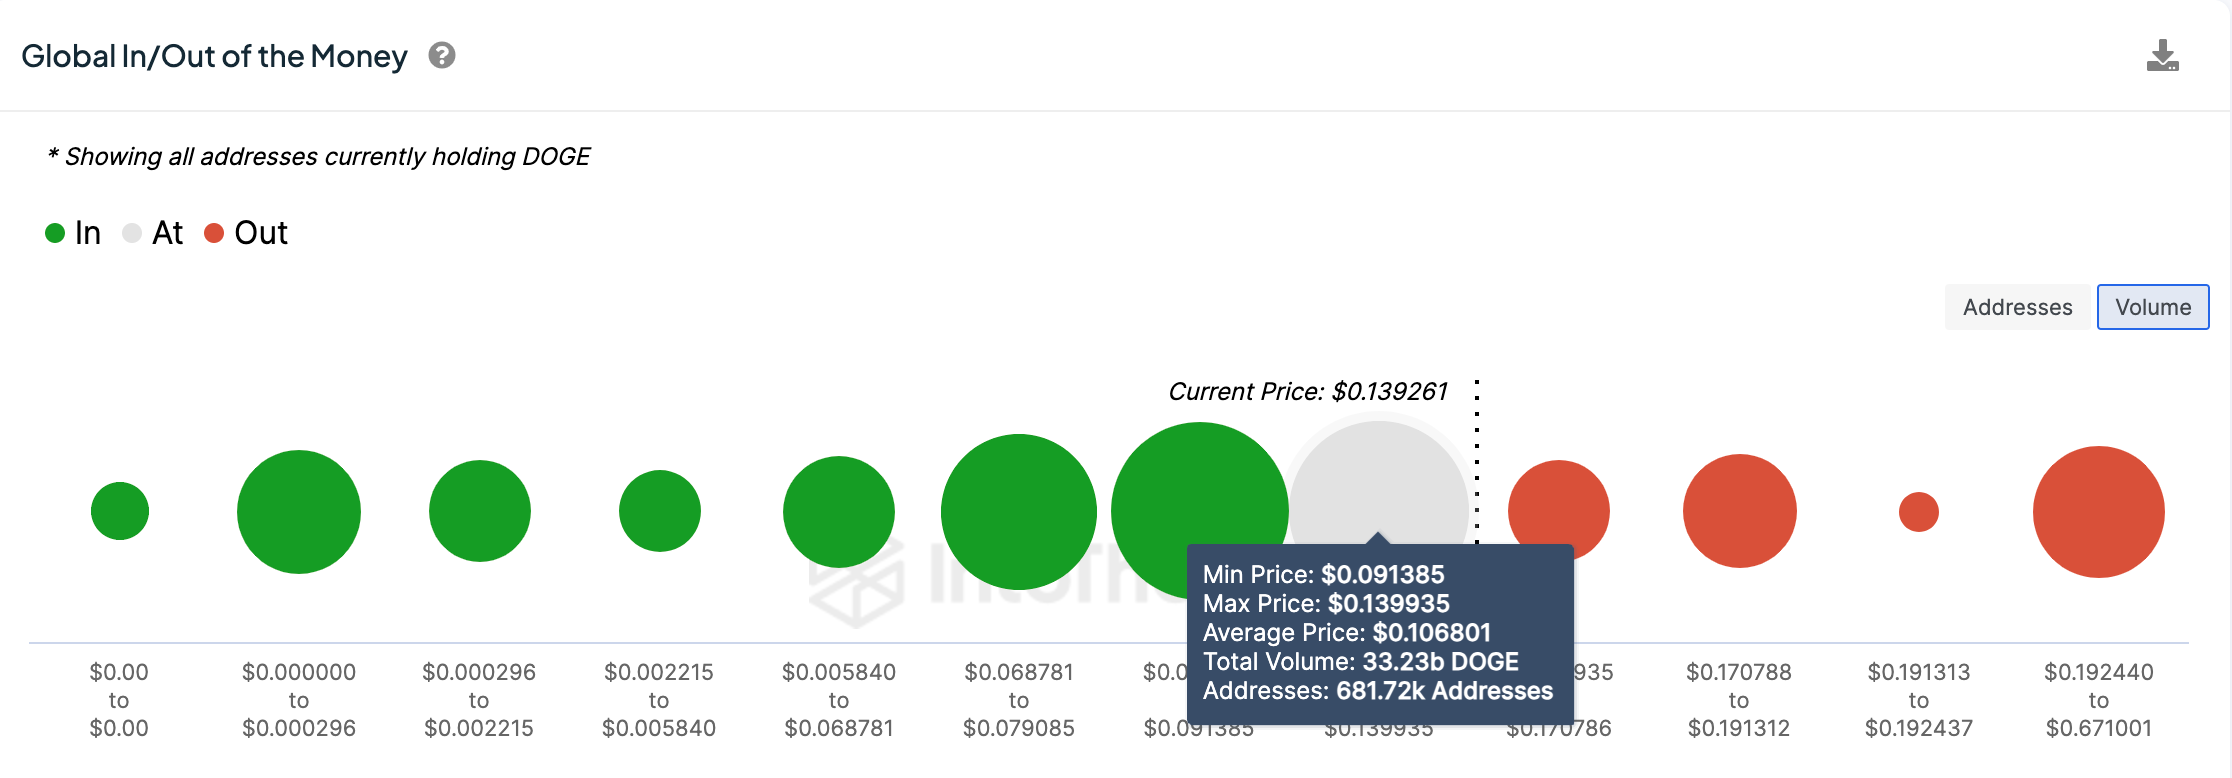 Dogecoin Price Forecast| GIOM data | Source: IntoTheBlock